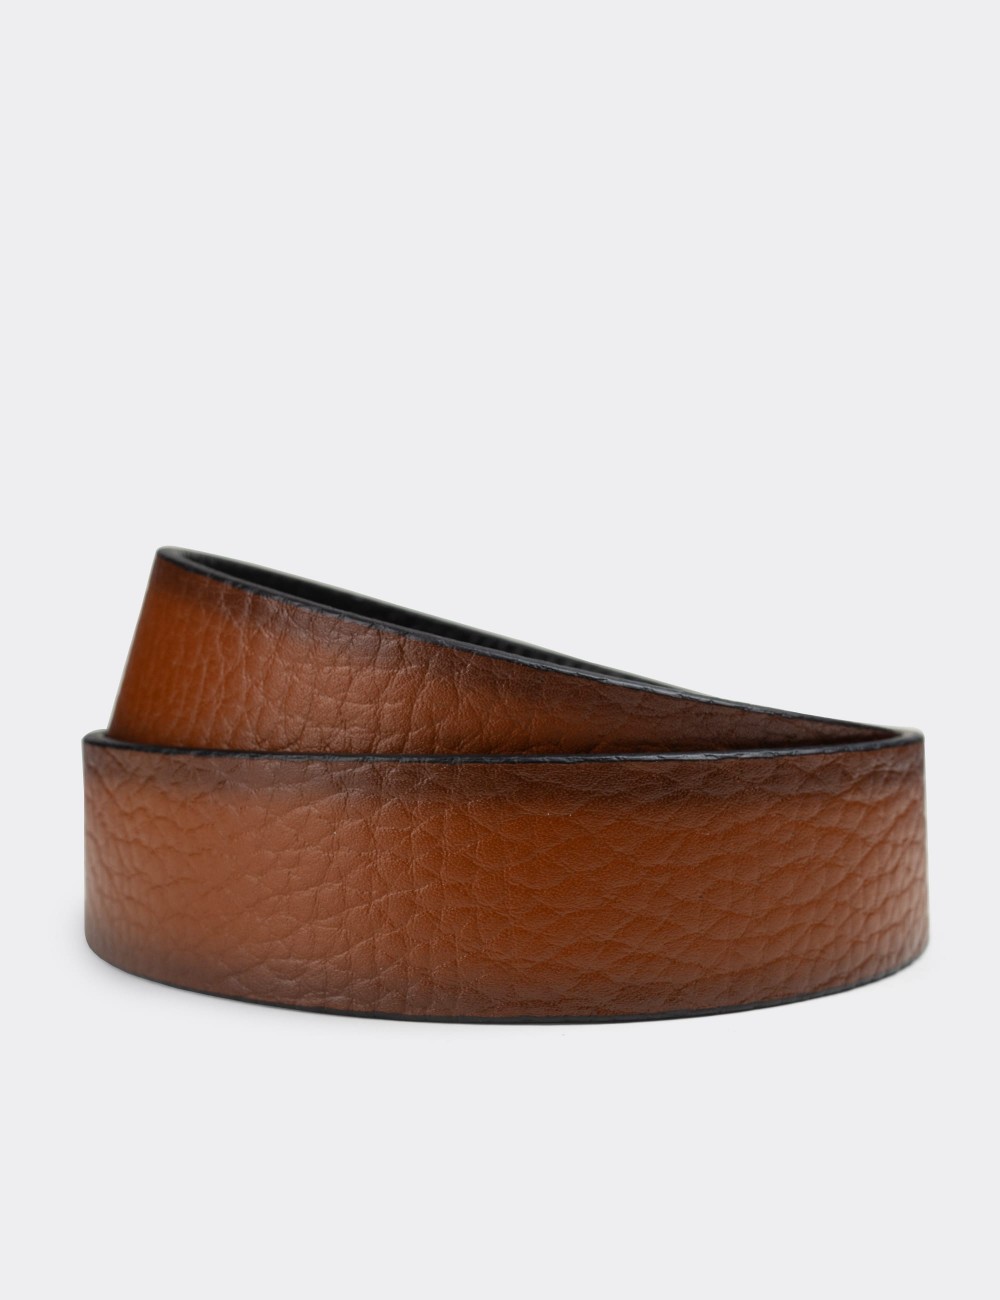  Leather Tan and Black Double Sided Men's Belt - K0405MTBAW01